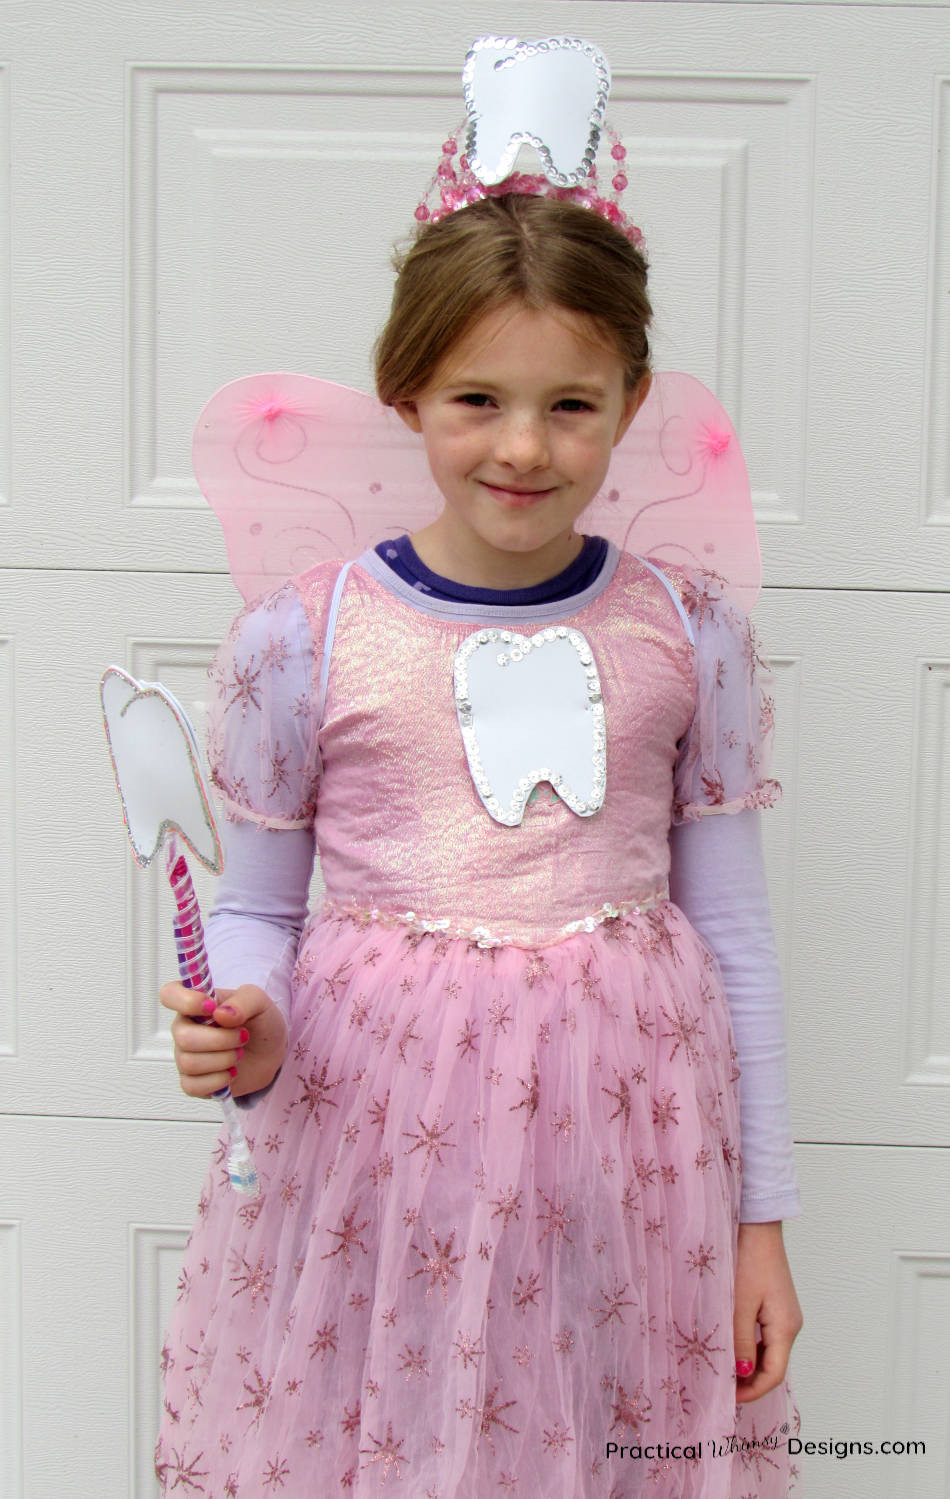 DIY Tooth Fairy Costume
 Easy Tooth Fairy Costume Practical Whimsy Designs